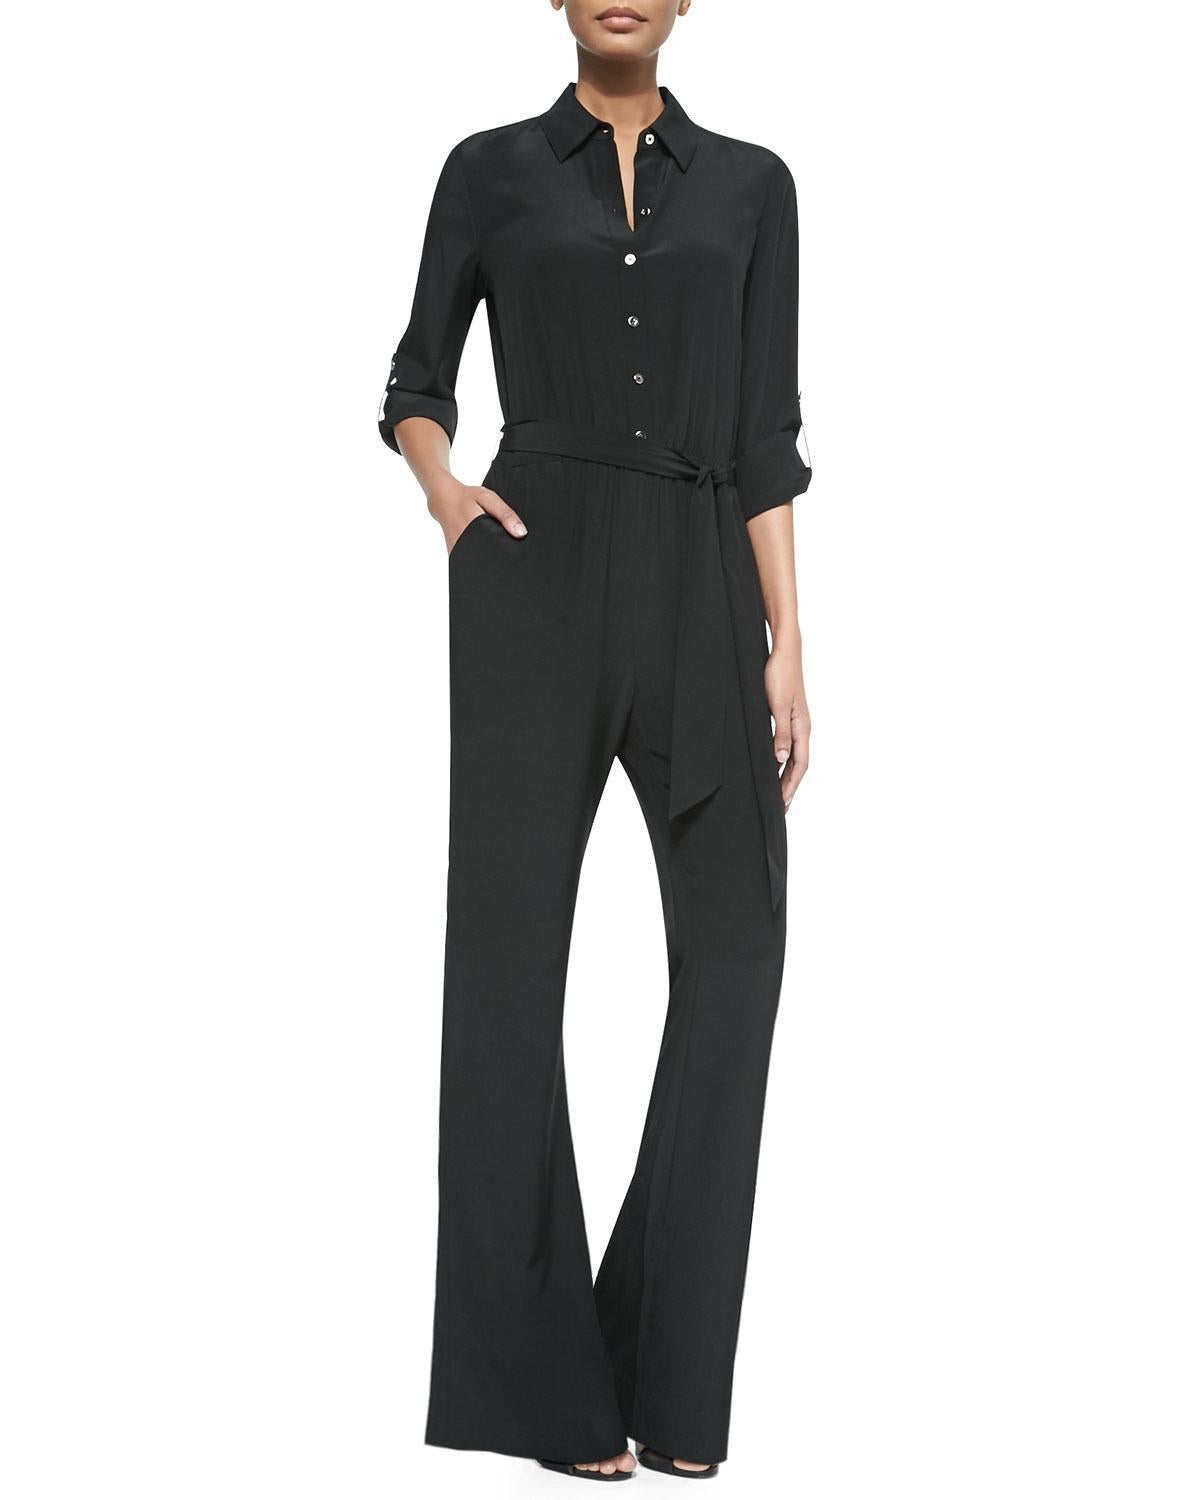 Diane von Furstenberg's black silk jumpsuit is an effortlessly stylish choice for any occasion. Crafted from fluid silk with a cinched waist and flared trousers, it's expertly tailored to create a sleek silhouette. 

    Diane von Furstenberg silk